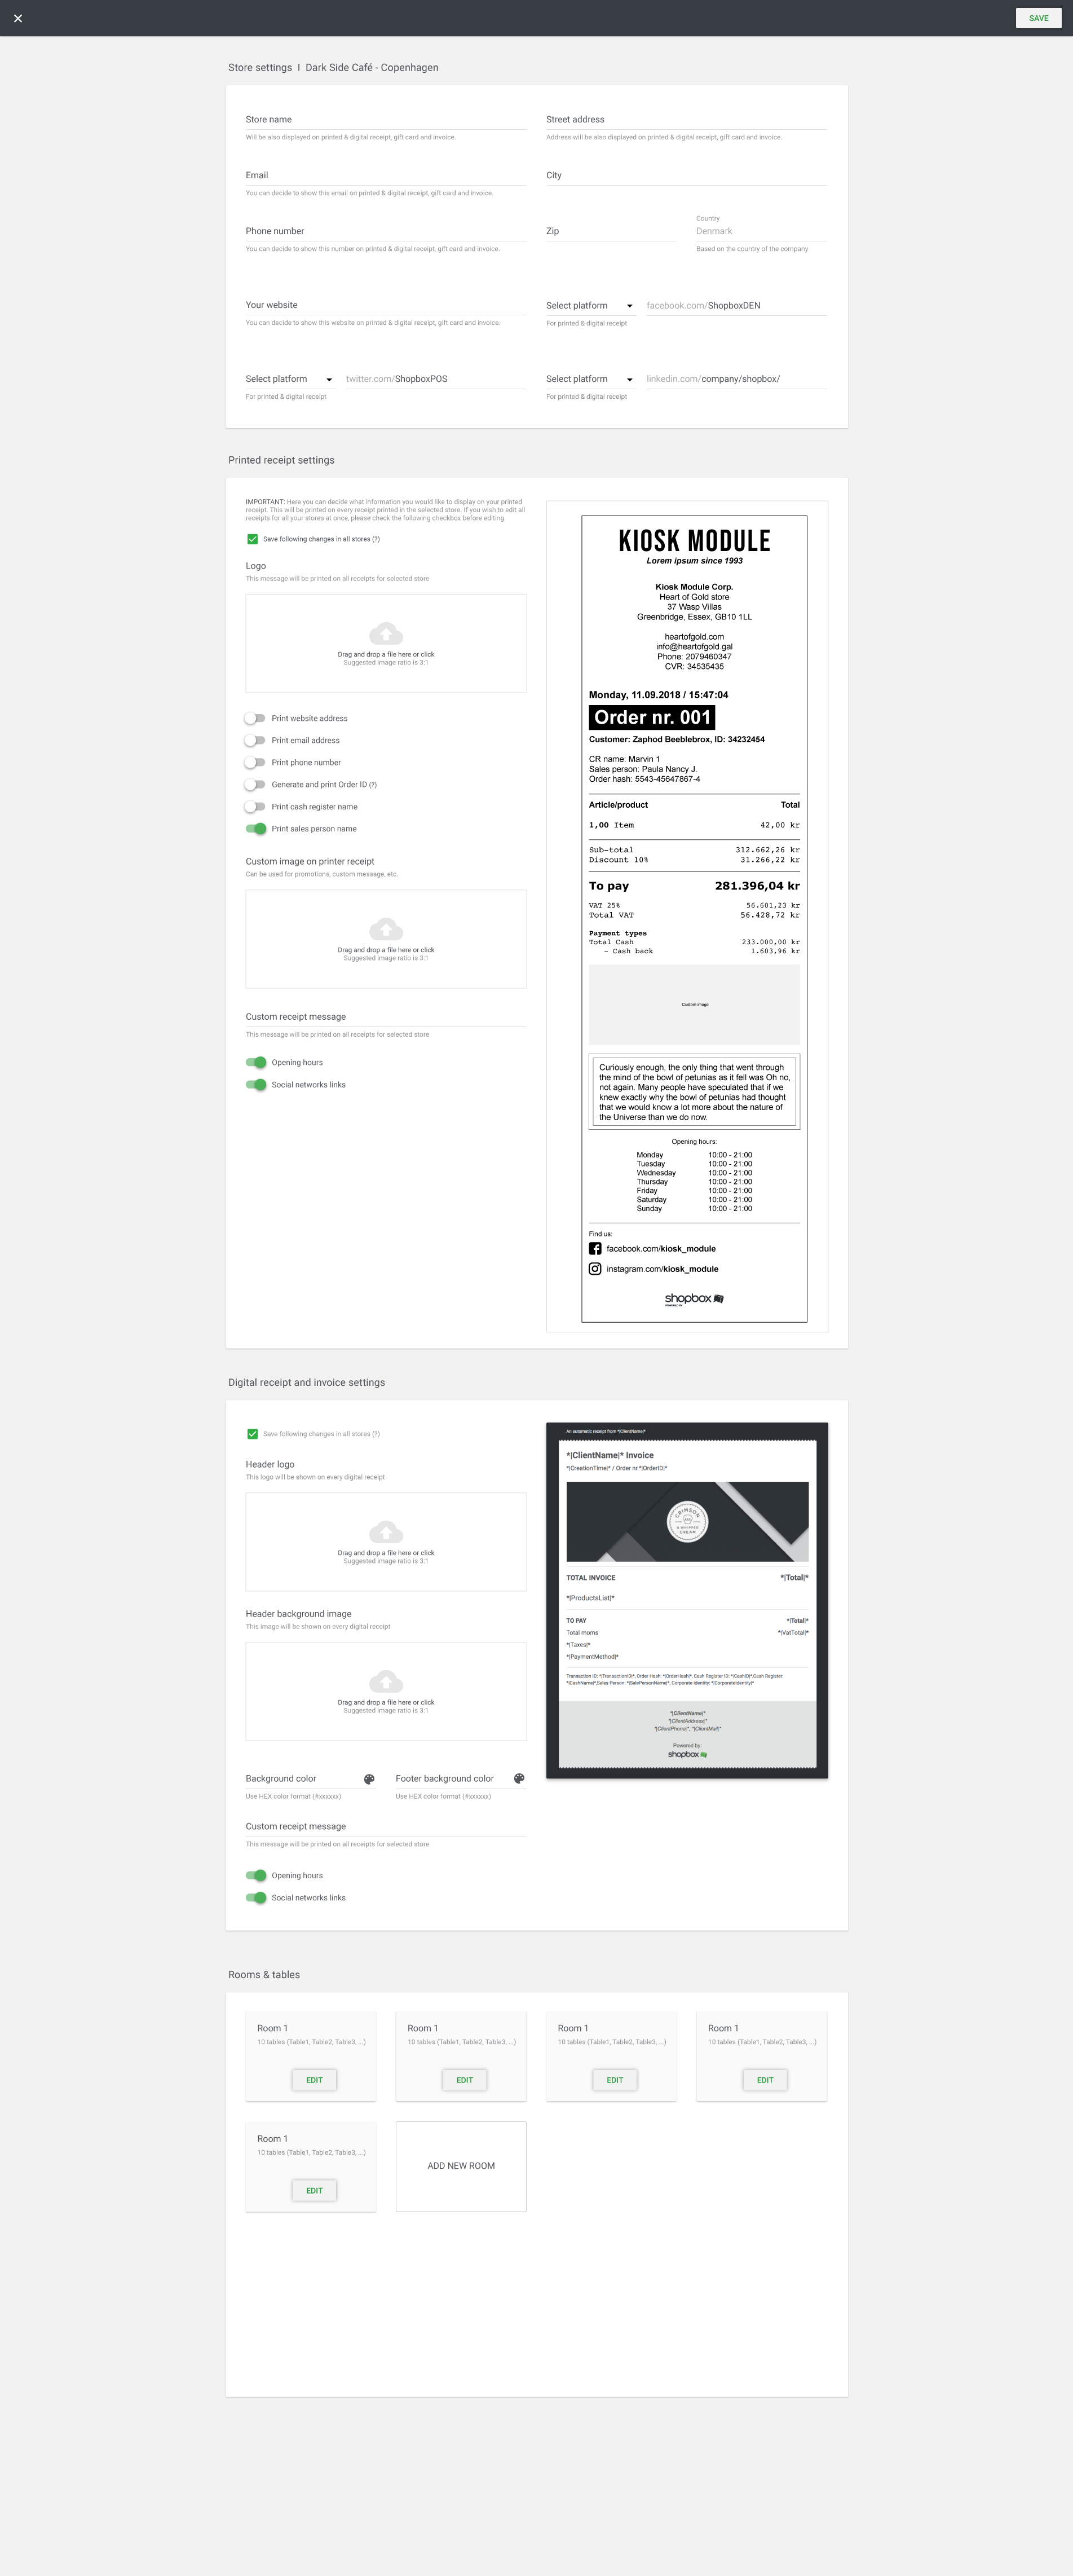 Store settings, printed and digital receipt - edit mode (Designed by Frederik Smal)